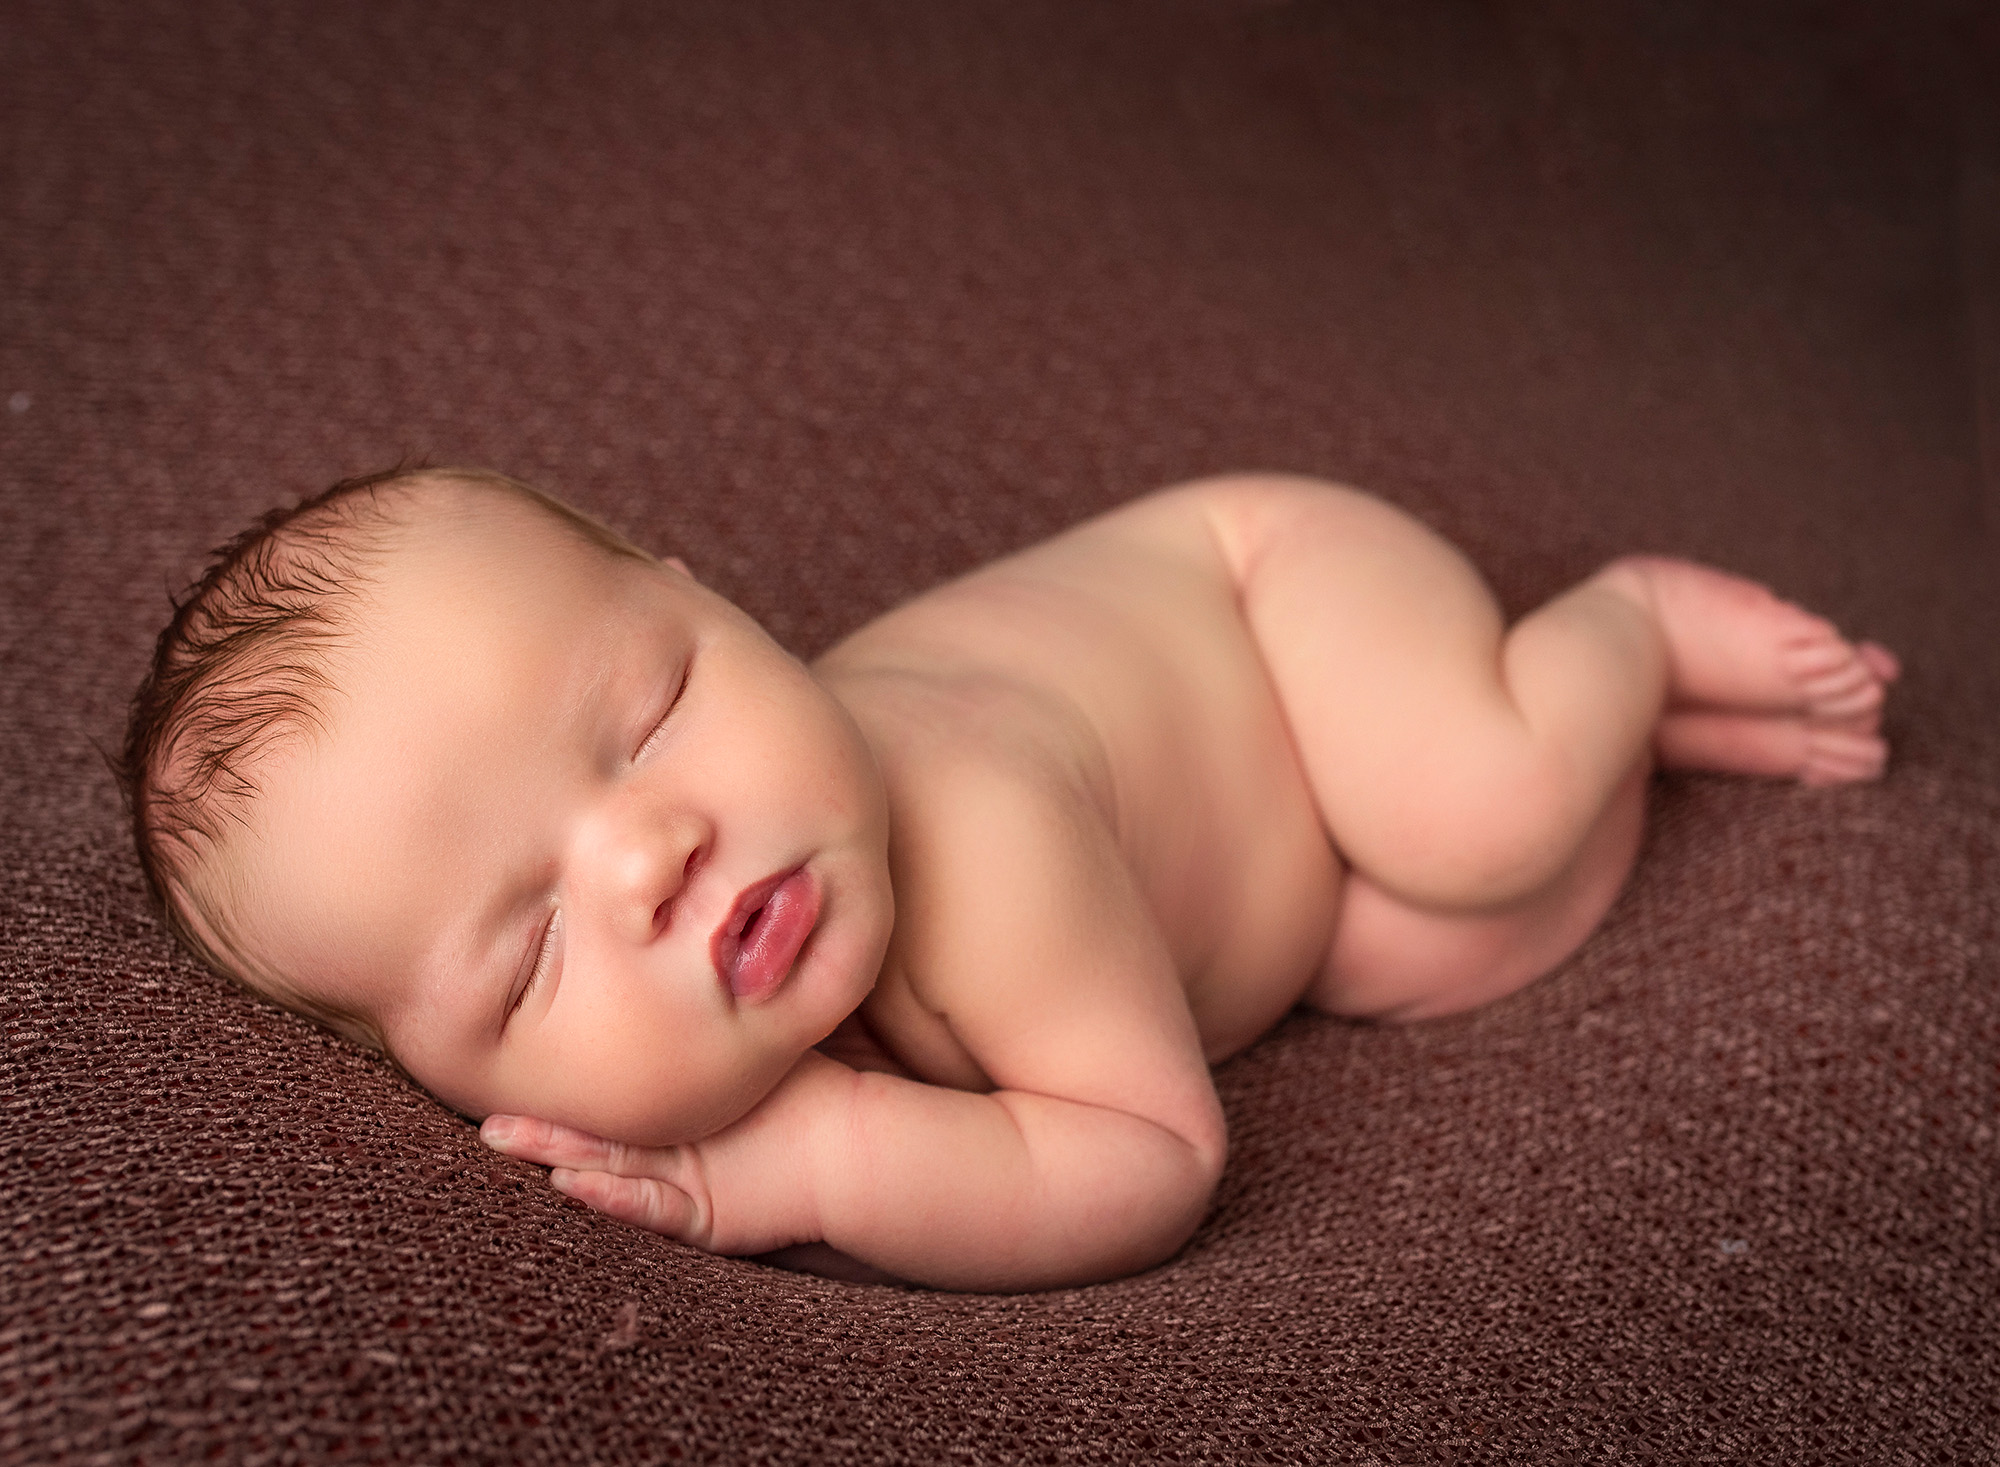 asleep naked newborn baby boy laying on his side on brown blanket